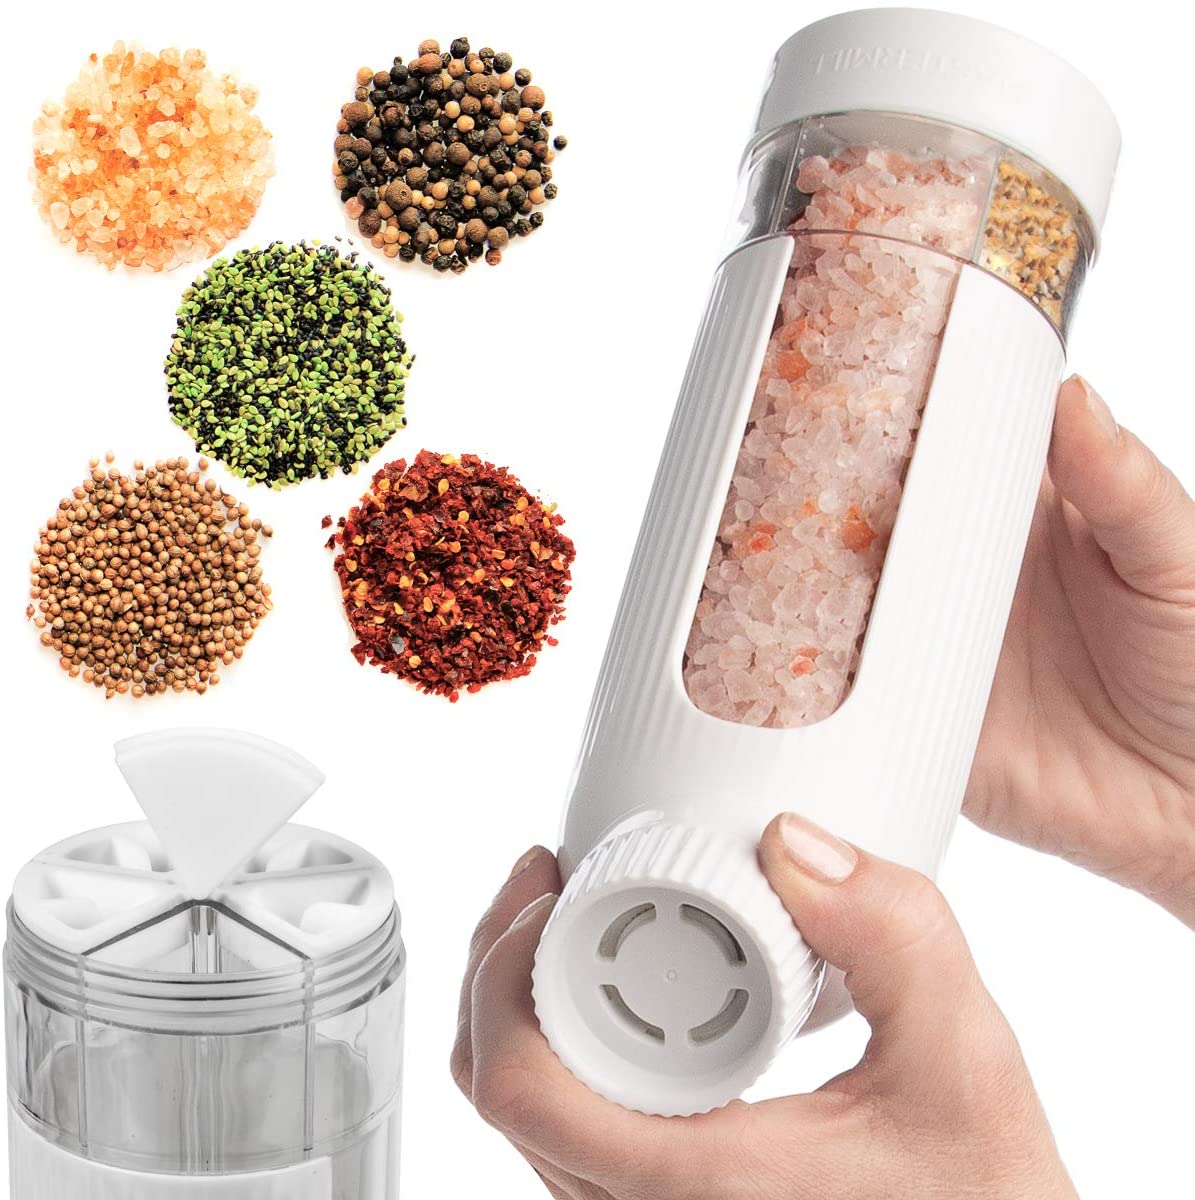 MasterPan MP-148 Mastermill 5-in-1 Multi Section Spice Grinder & Dispenser White